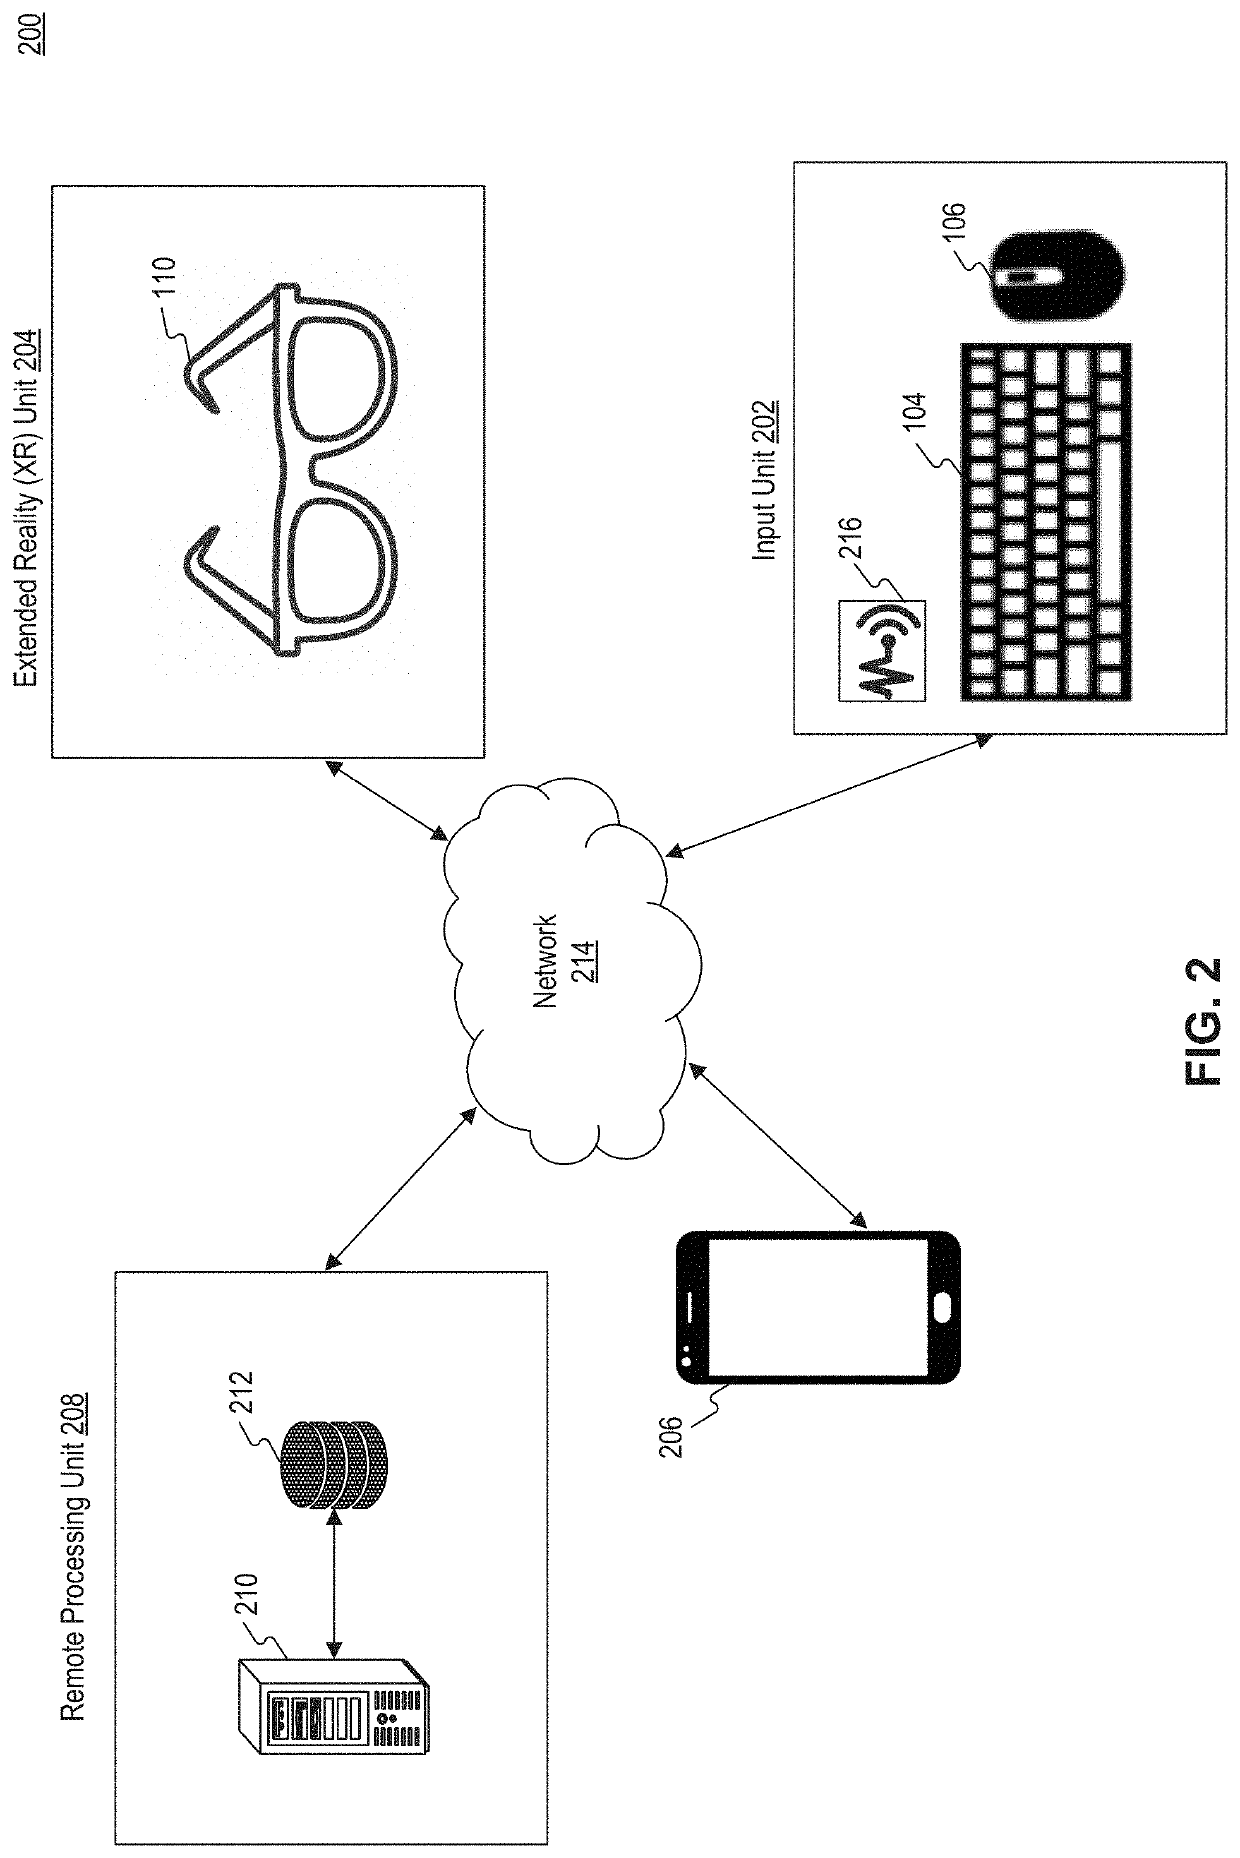 Systems and methods for virtual whiteboards